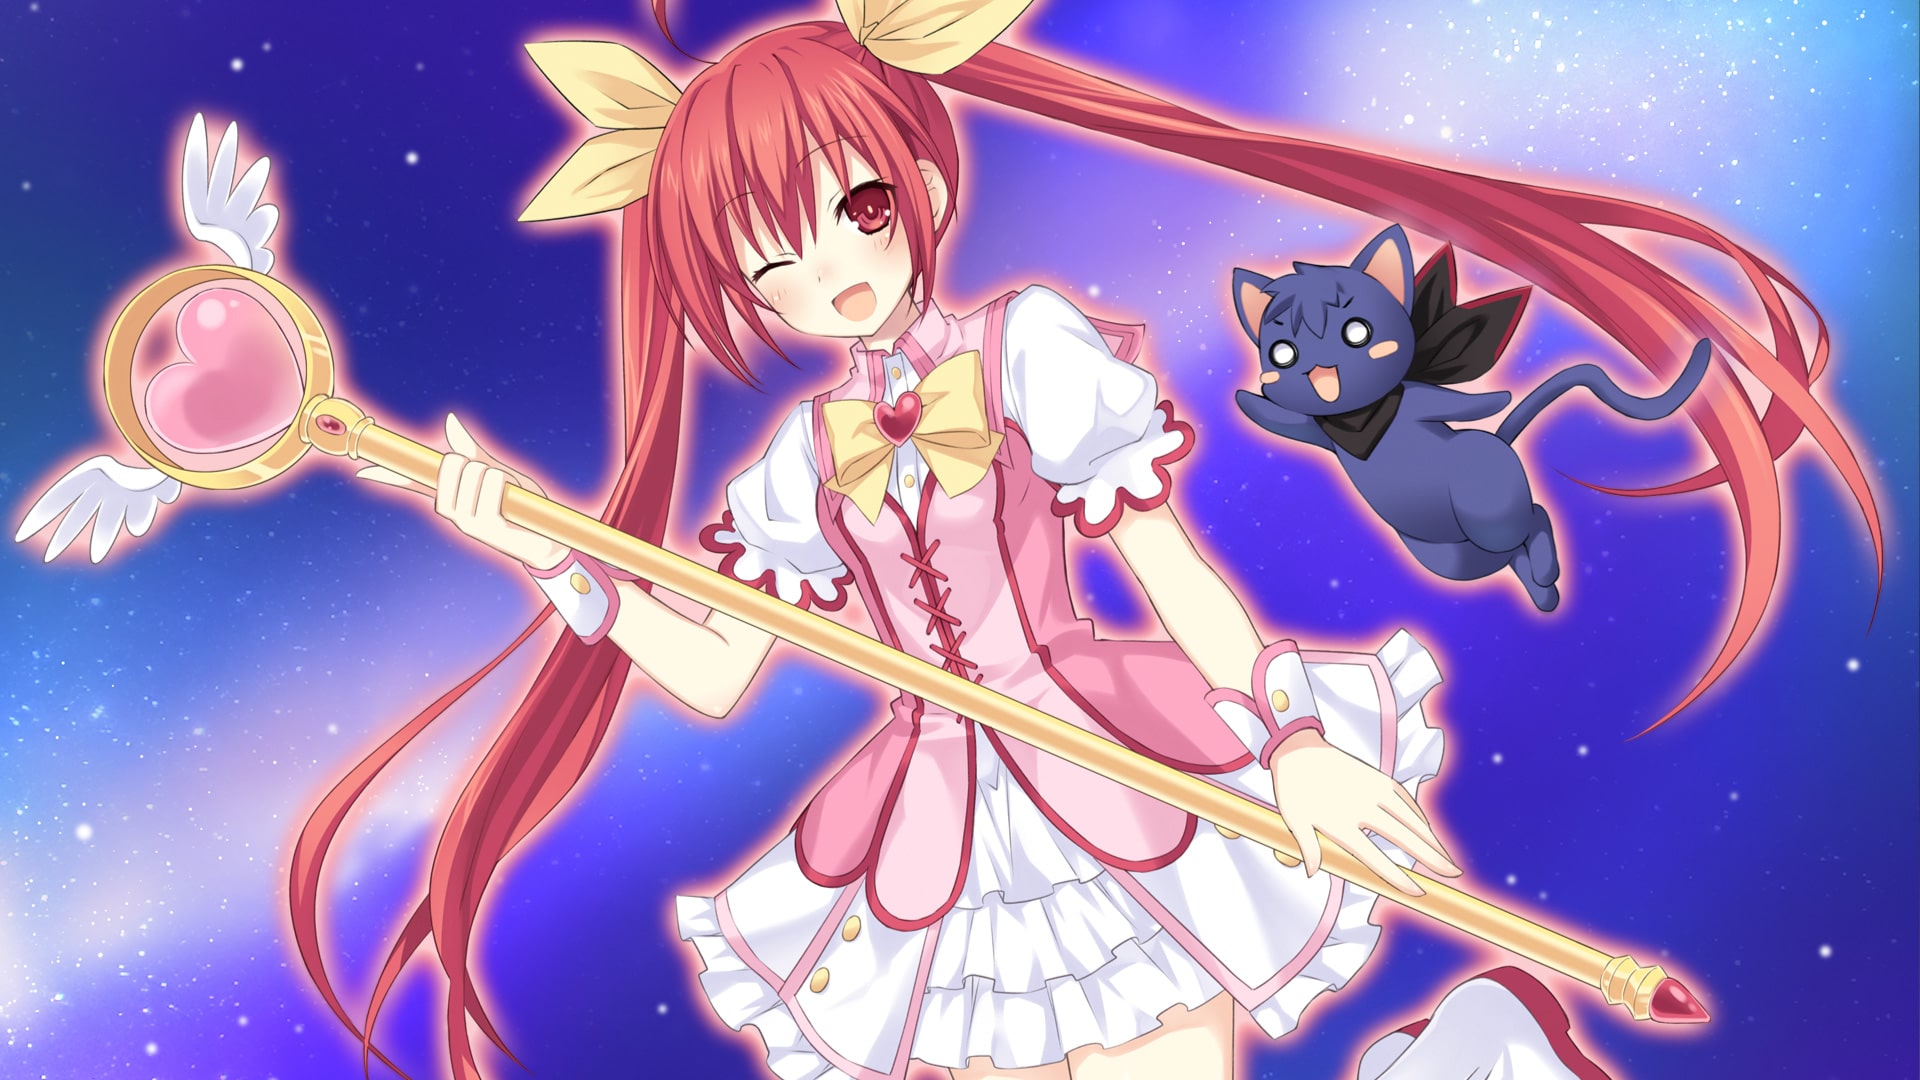 DATE A LIVE: Rio Reincarnation Heads to PlayStation 4 This June